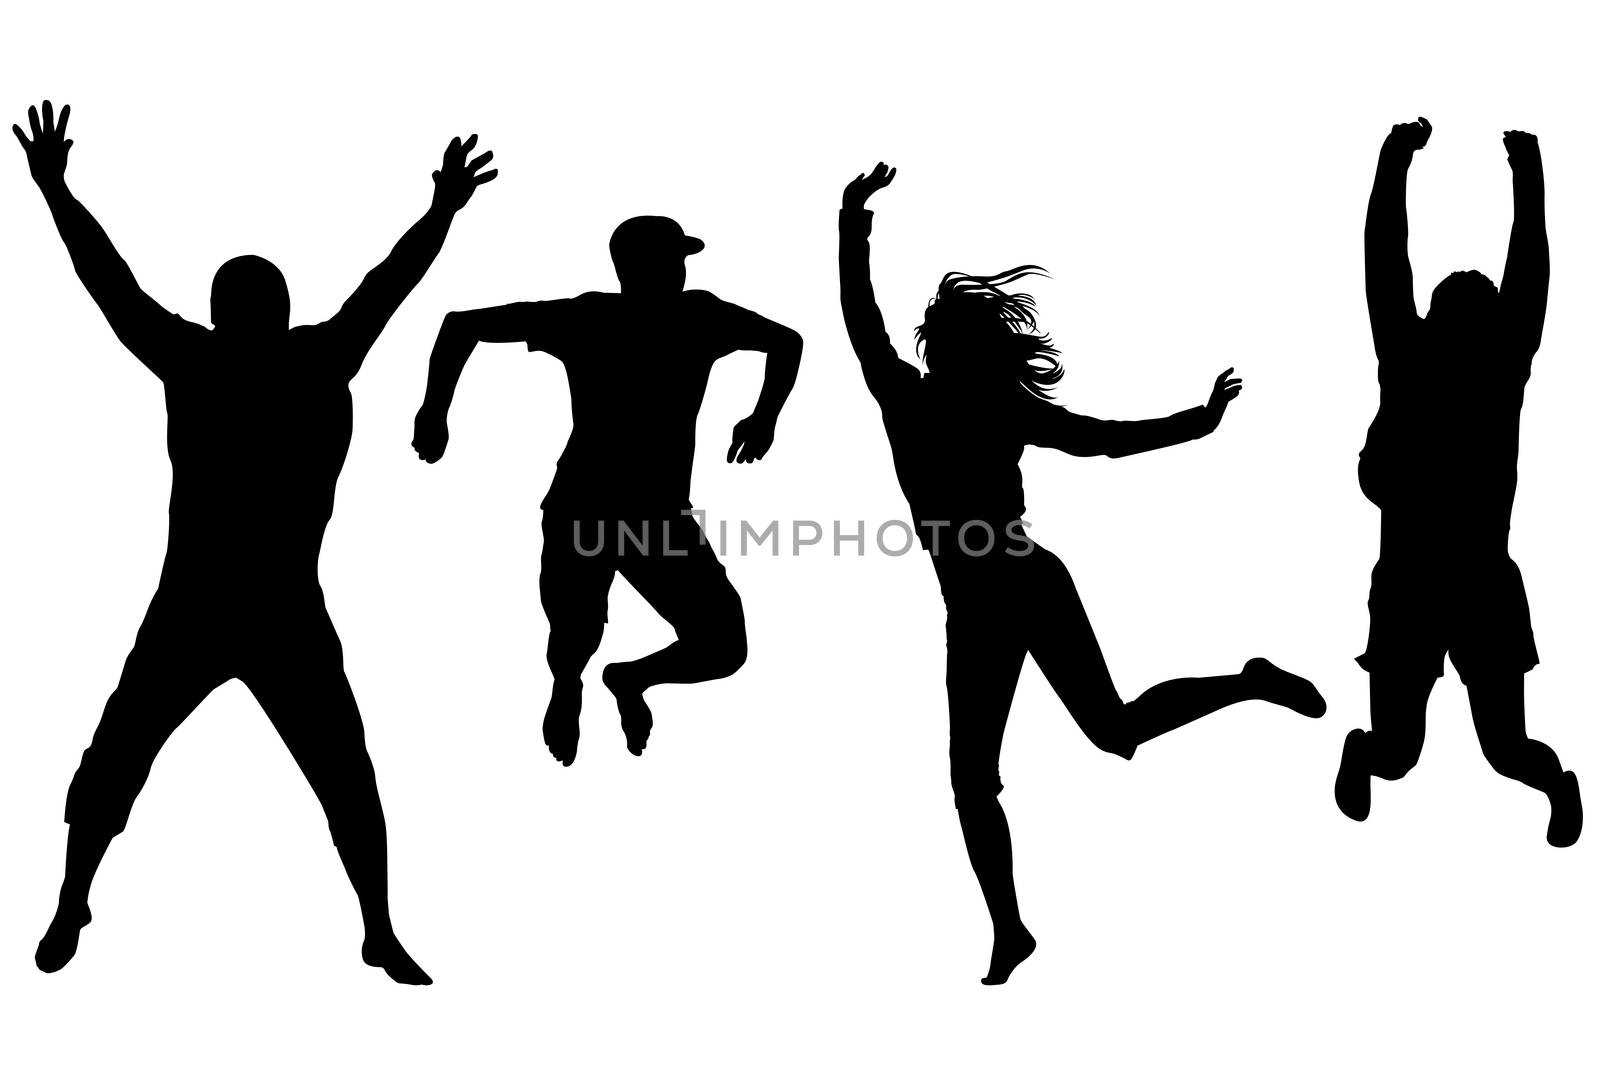 Silhouettes of happy people jumping